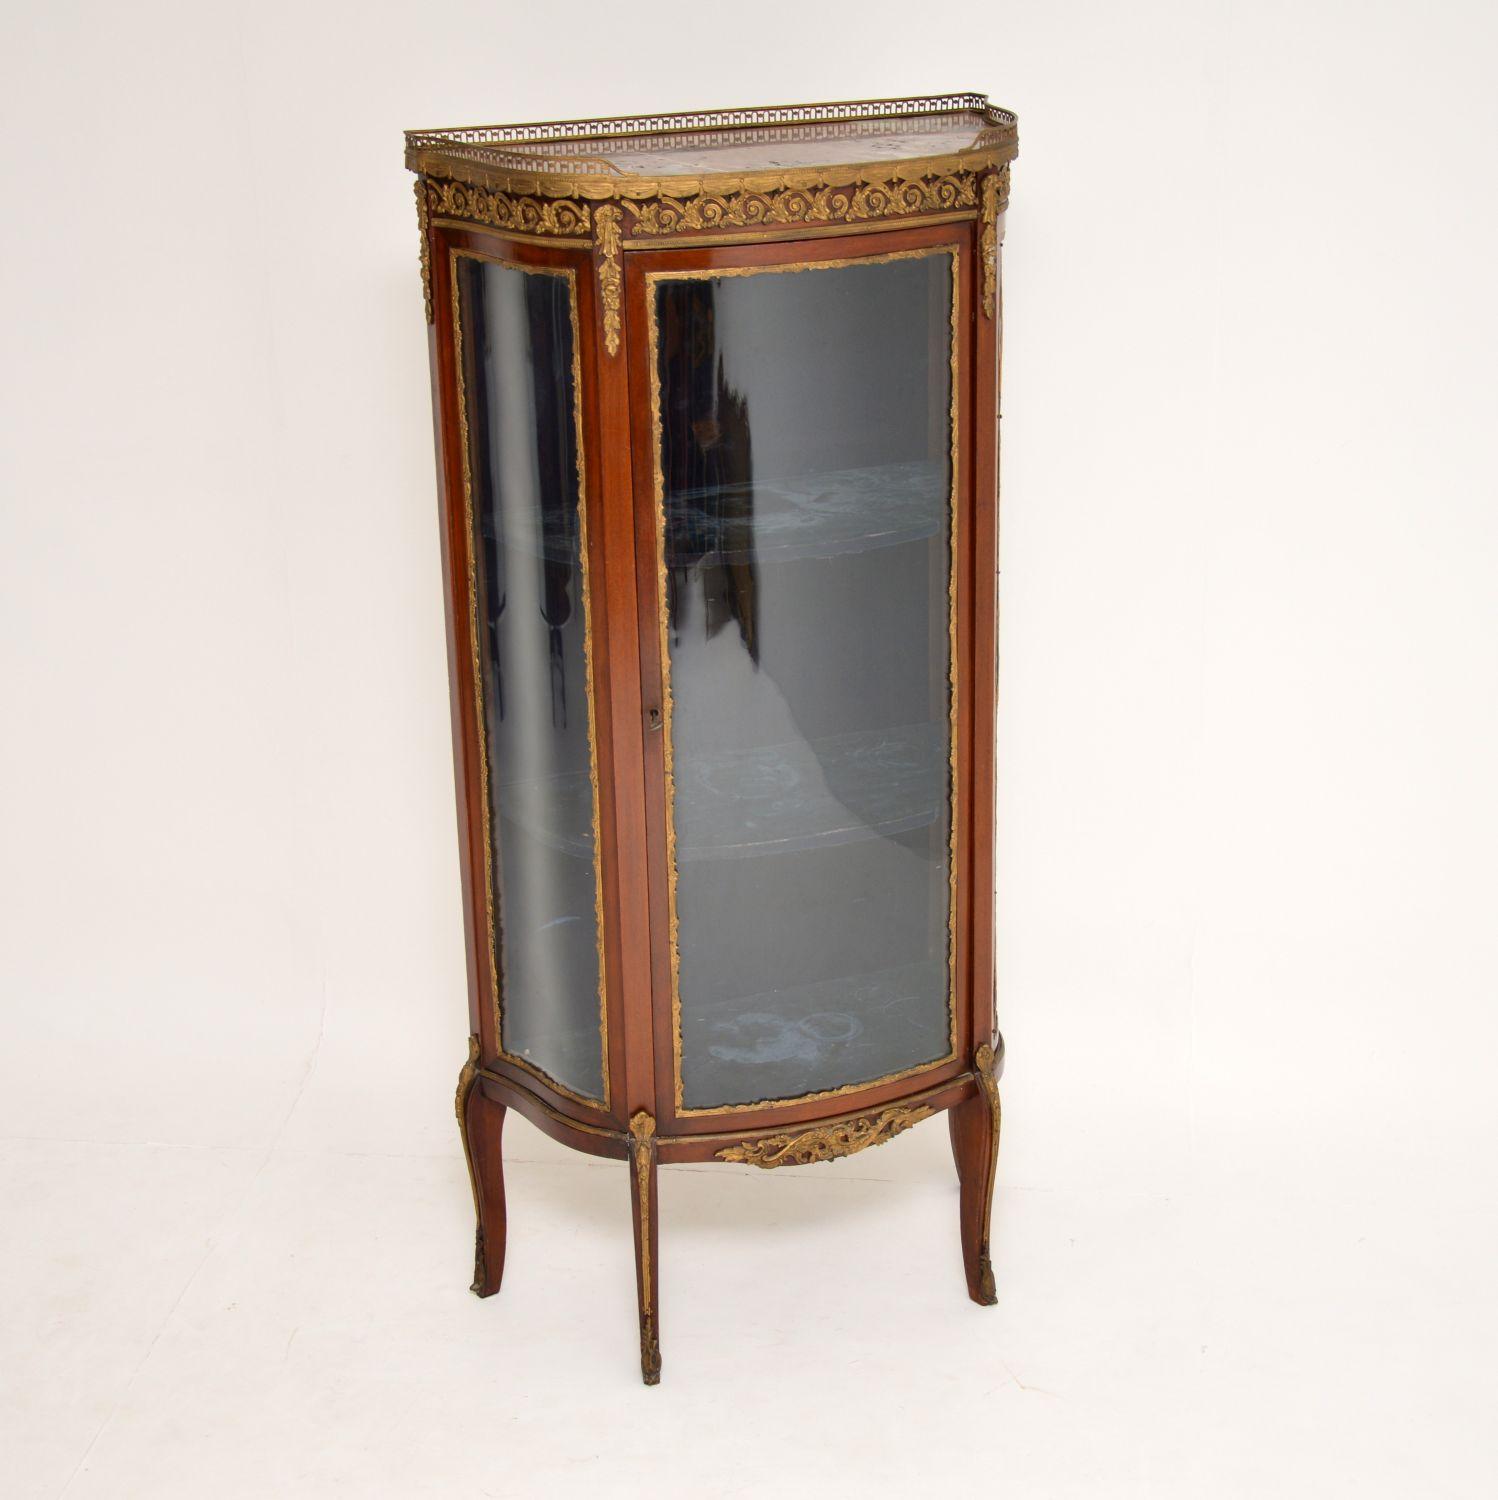 French antique Louis XV style mahogany display cabinet dating from circa 1880s-1890s period and in very good original condition.

It has a marble top with a gilt metal pierced gallery with swags below. There are gilt bronze mounts on the top, on